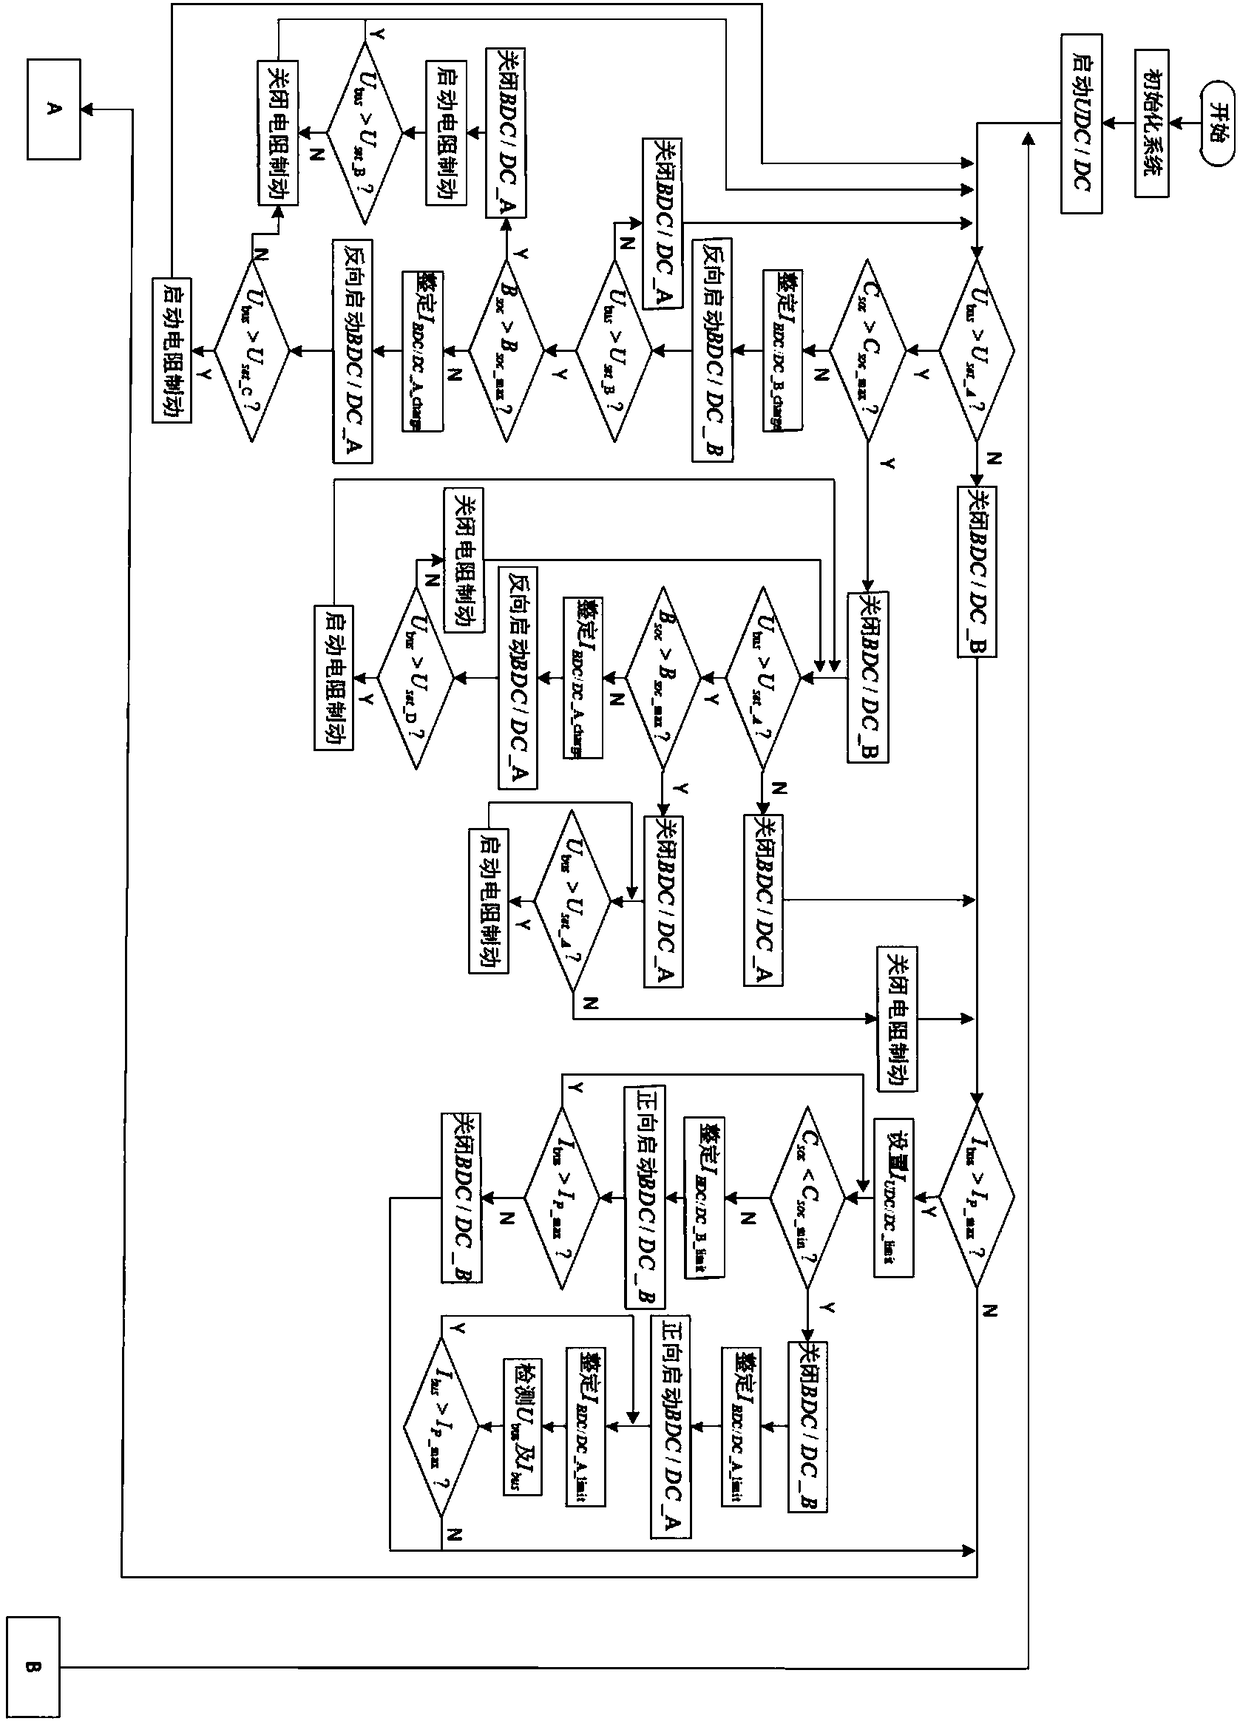 Energy management system and method for a fuel cell hybrid locomotive